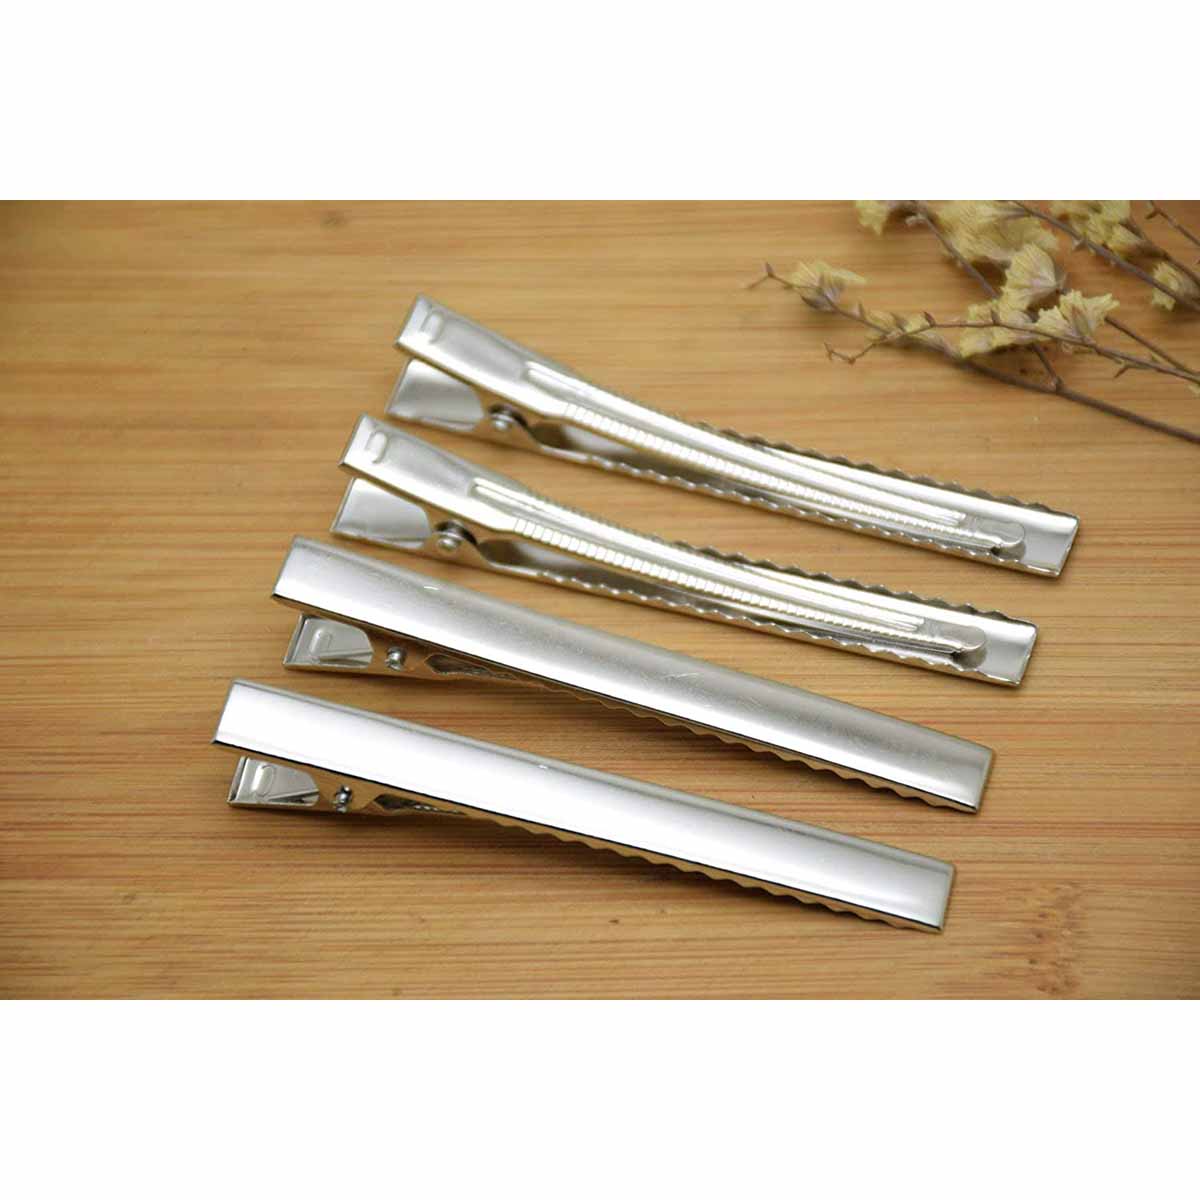 50 rectangle alligator hair clips 75mm-Silver